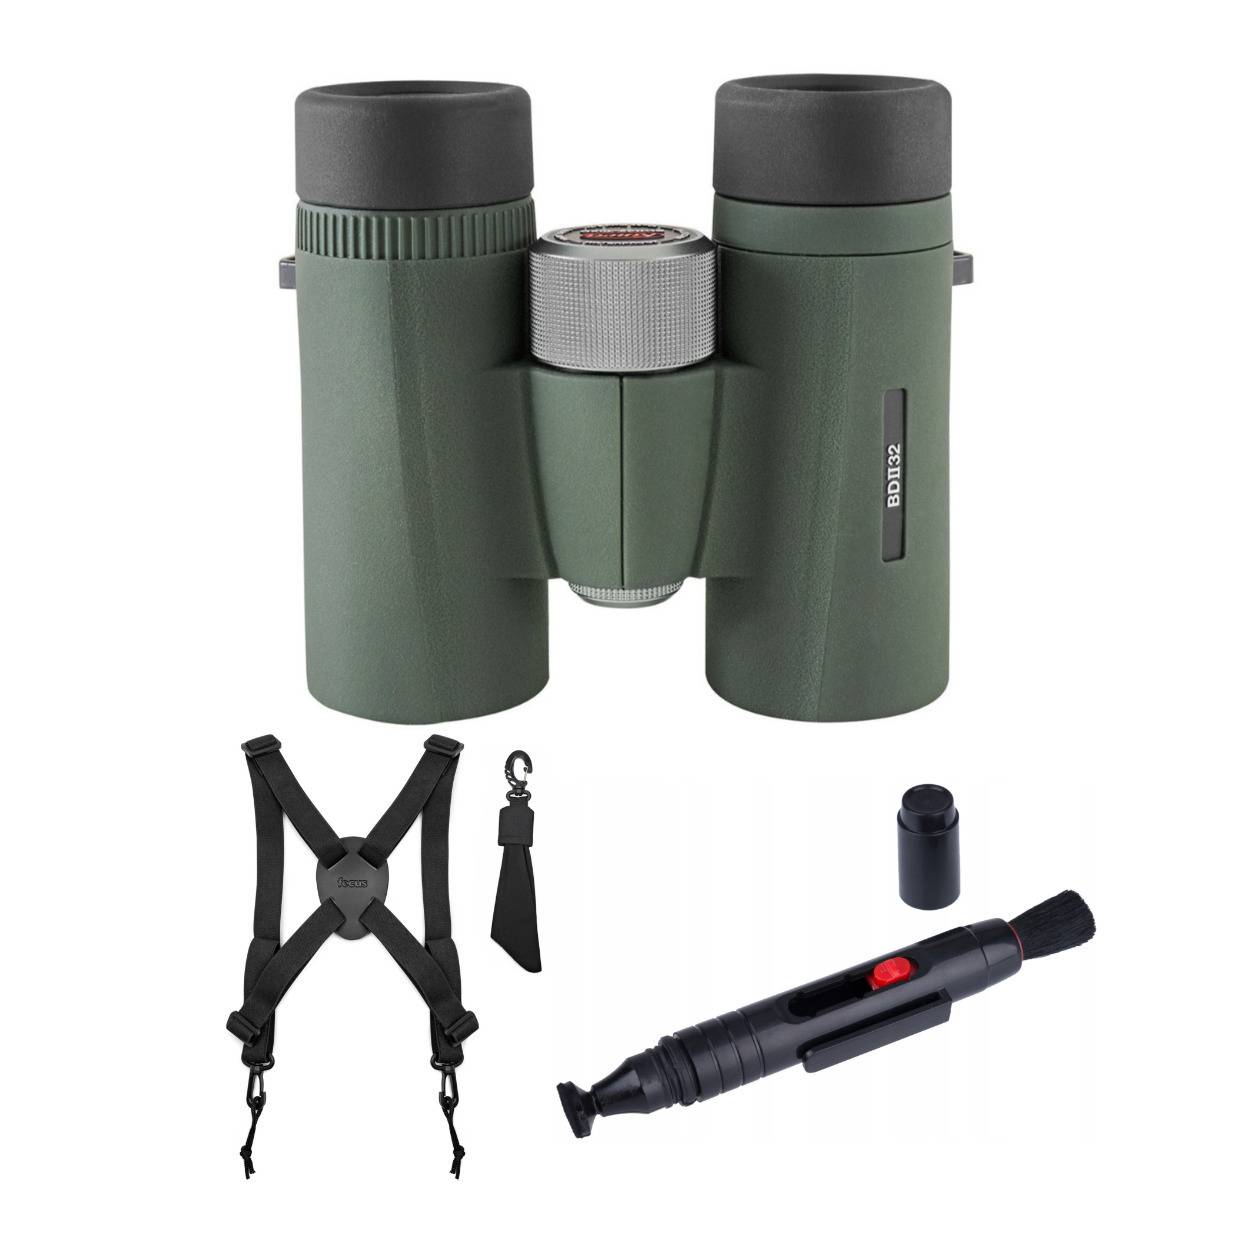 Kowa 8x32 BDII-XD Prominar Roof Prism Binoculars with Harness and Lens Pen